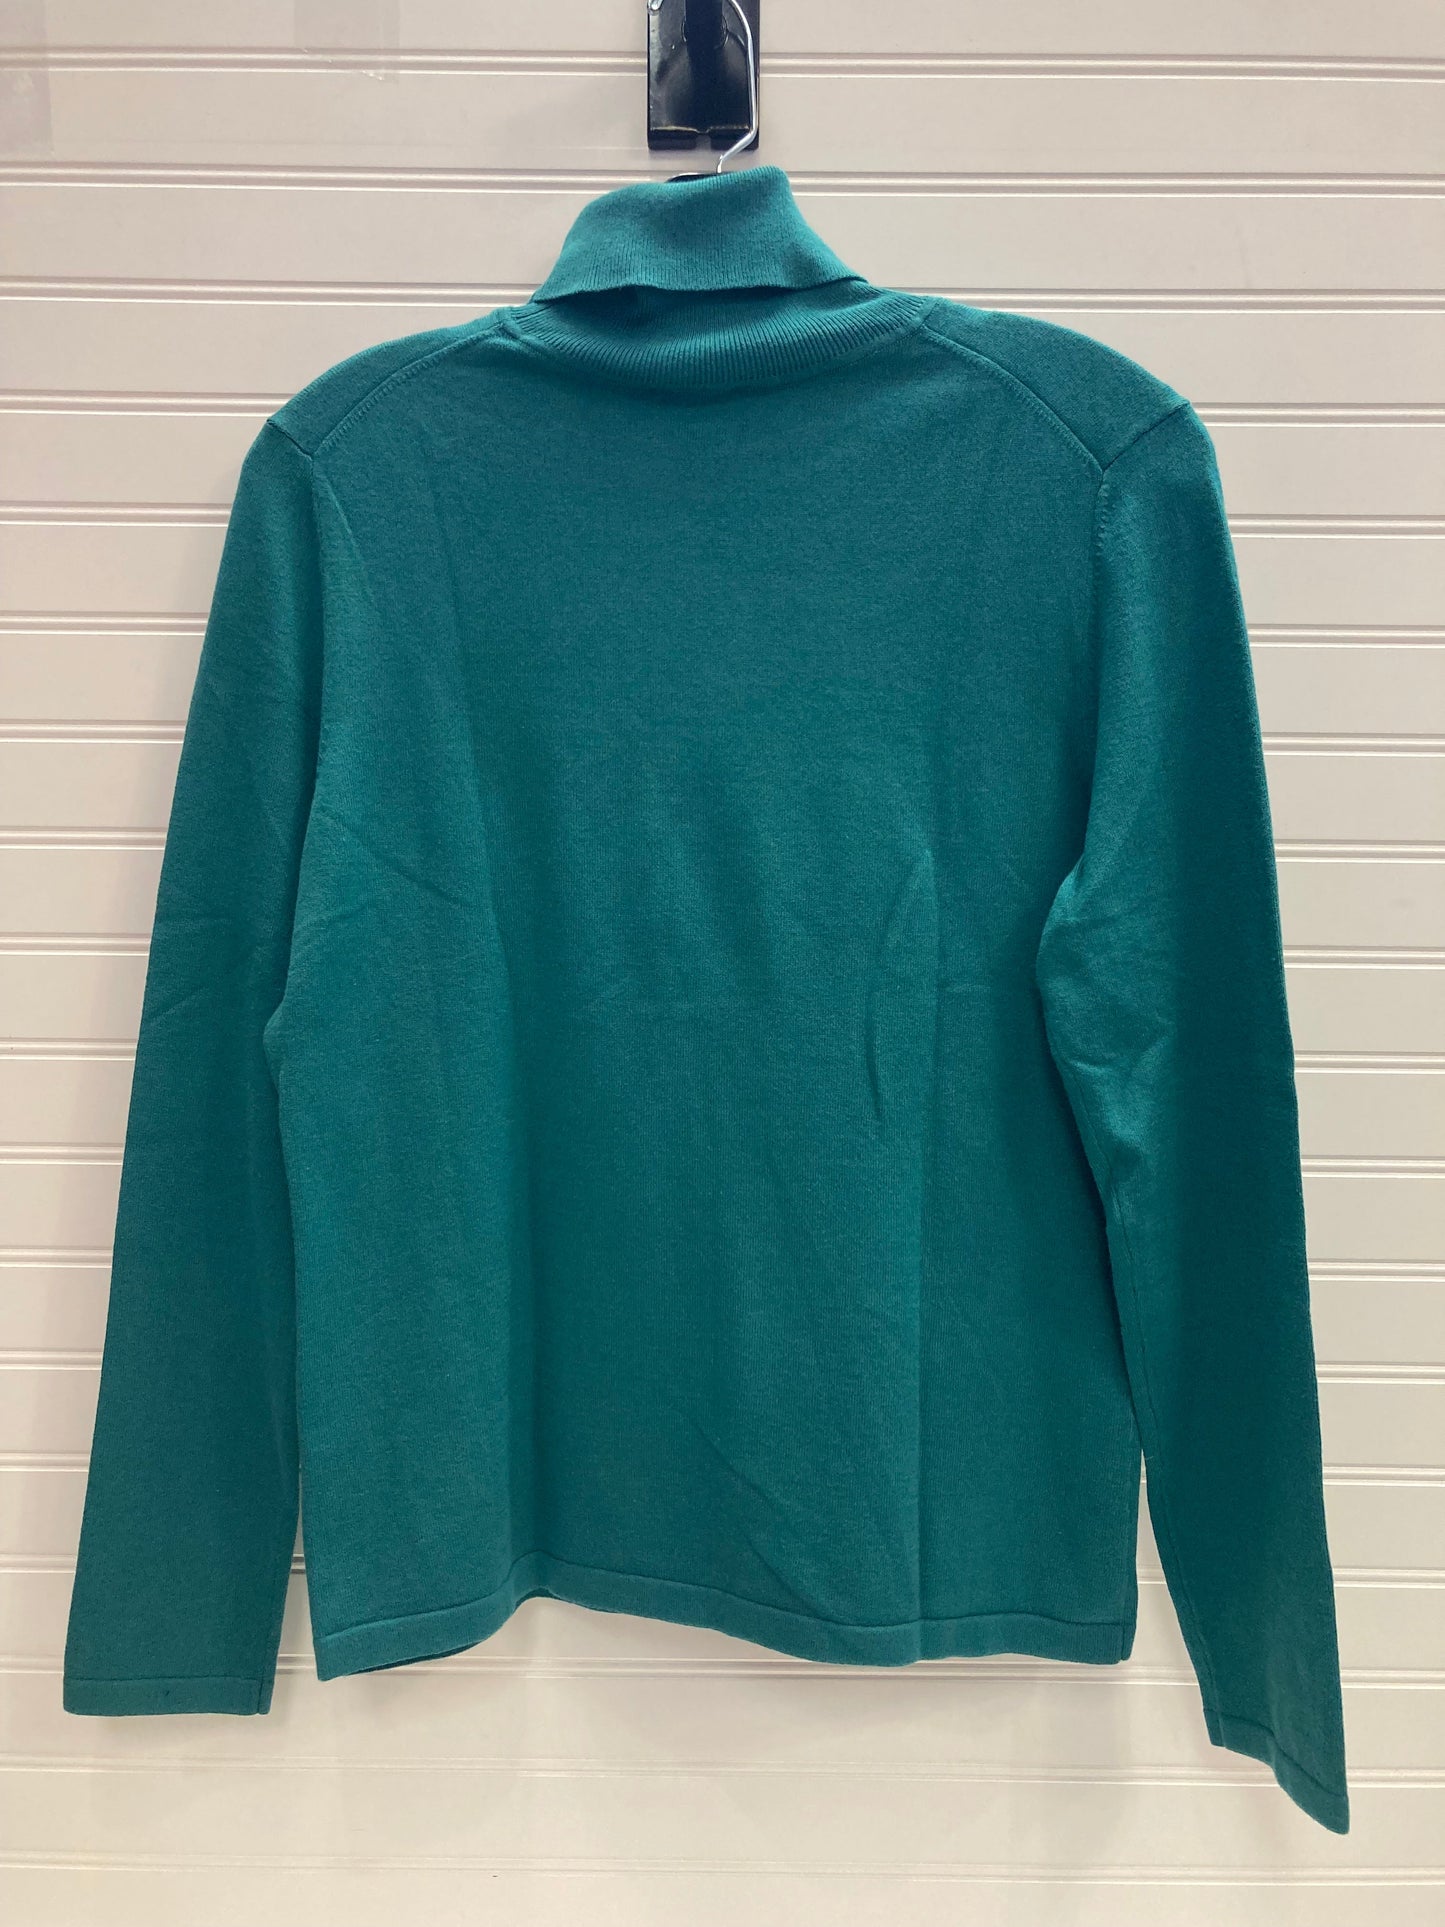 Top Long Sleeve Basic By Talbots  Size: Petite Large